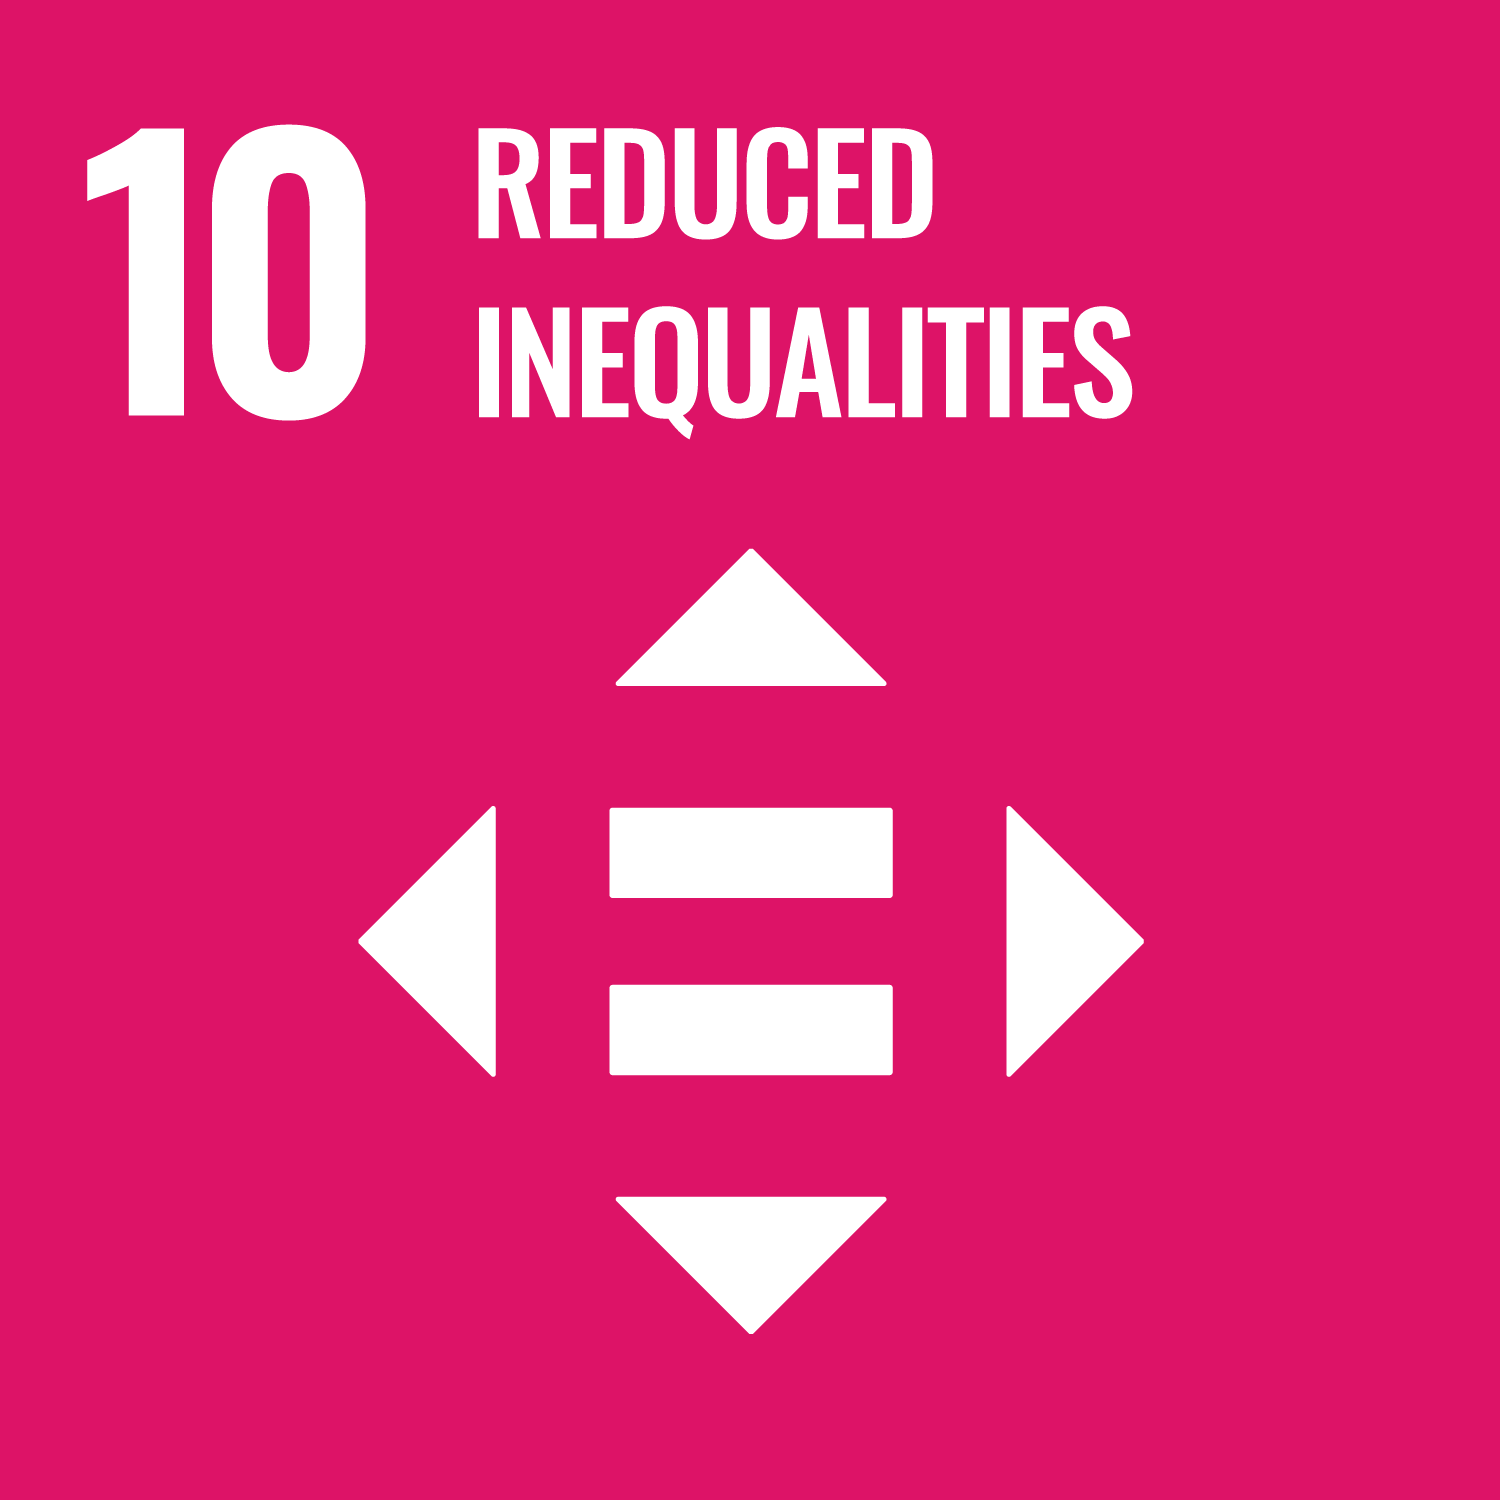 United Nations Sustainable Development Goal Number 10 Reduced Inequalities